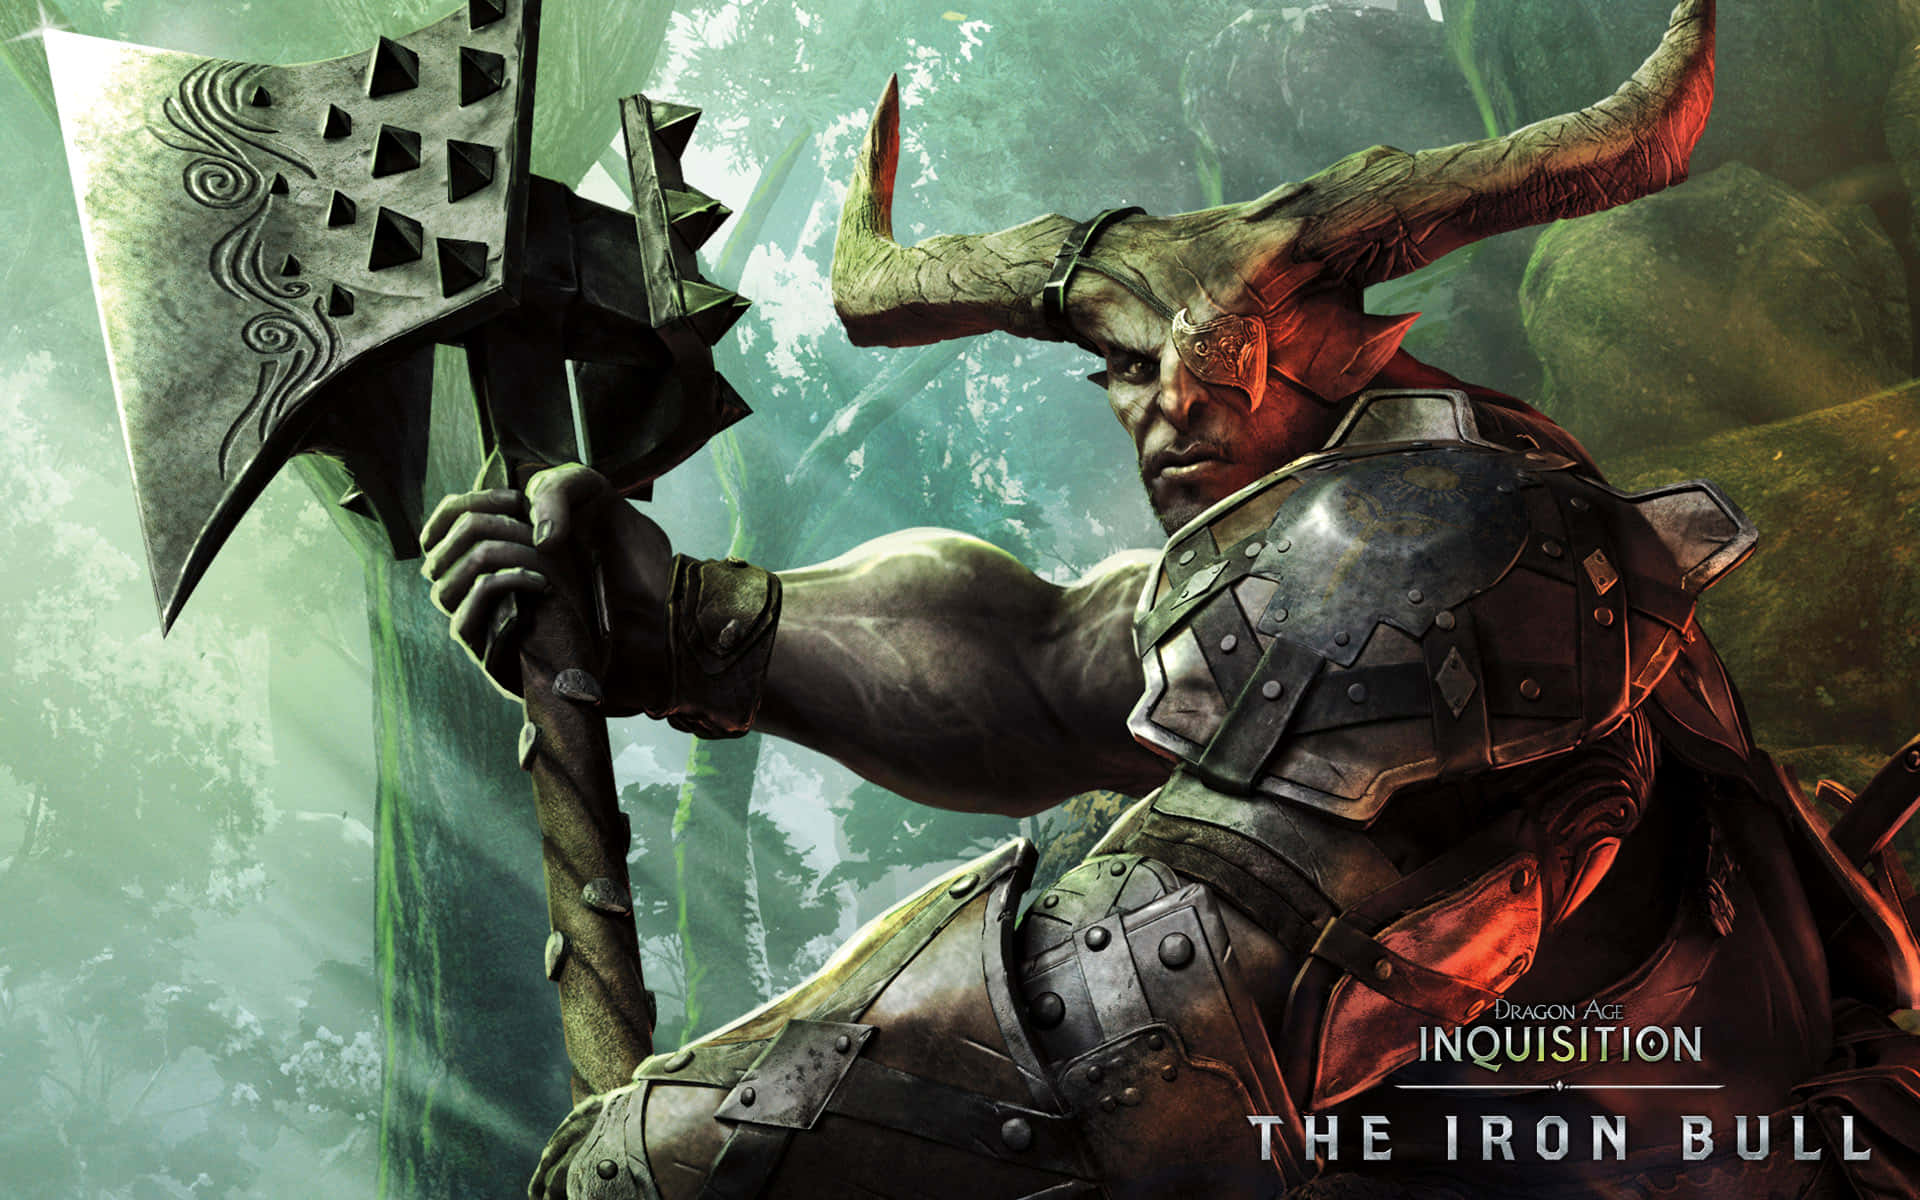 Explore and uncover the secrets of Thedas in Dragon Age: Inquisition.